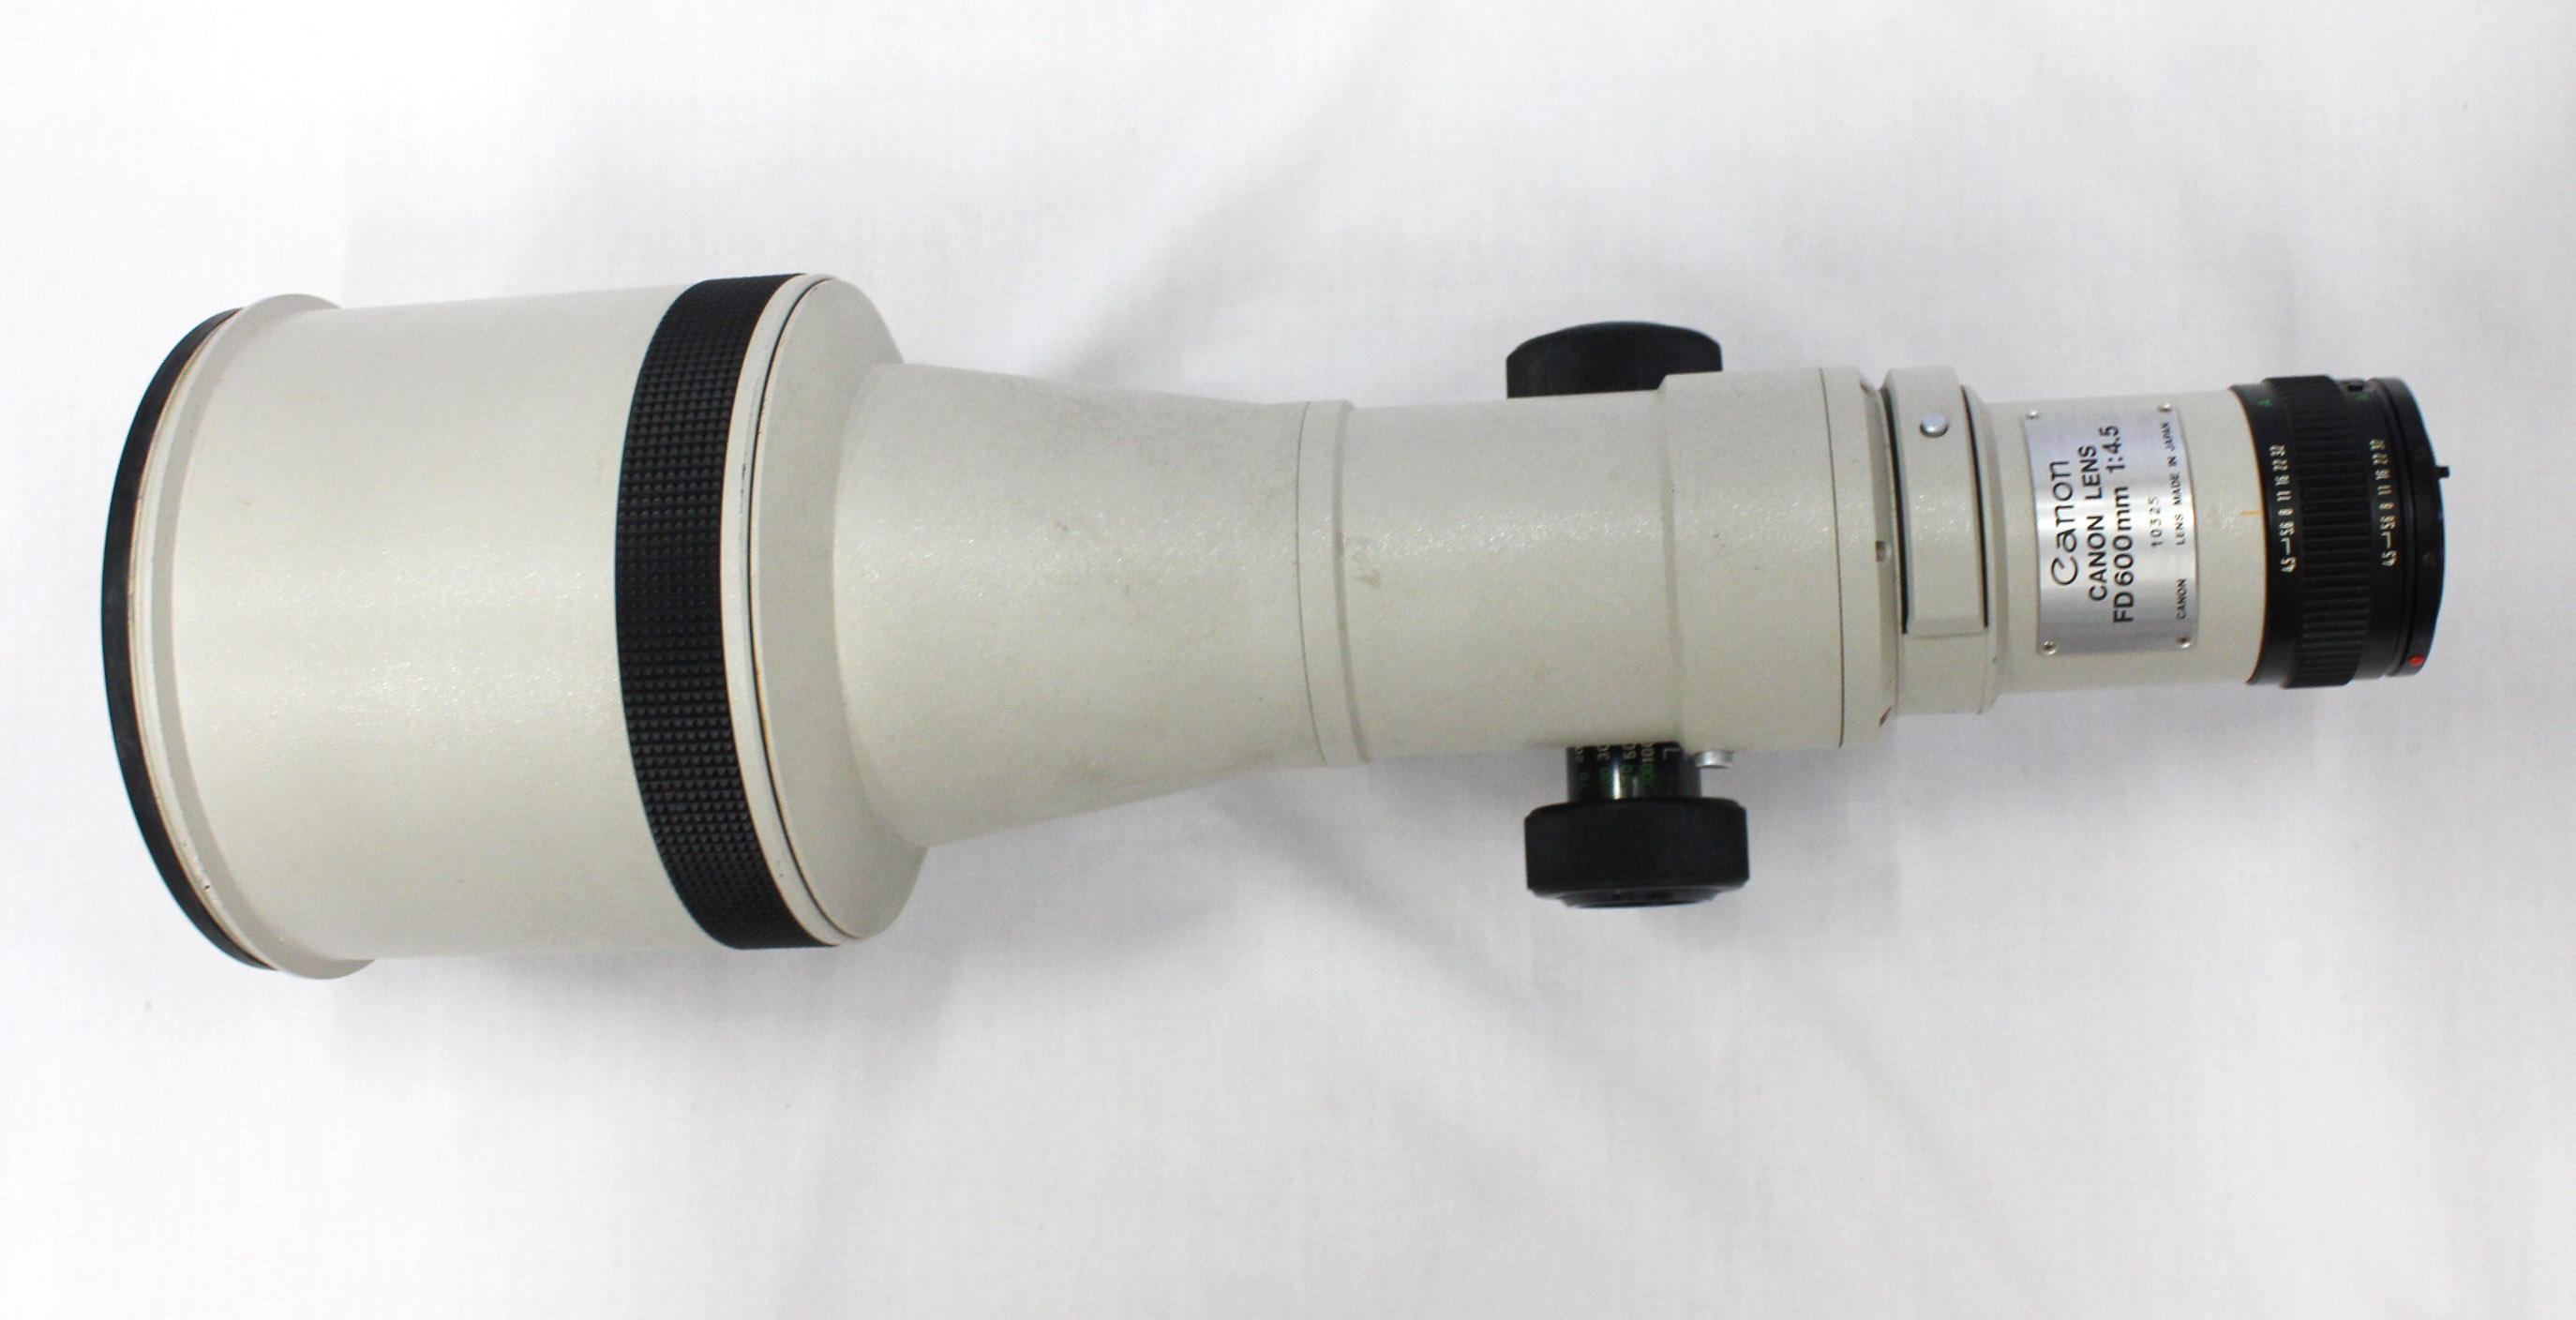 Canon New FD NFD 600mm F/4.5 MF Telephoto Lens from Japan (C1878 